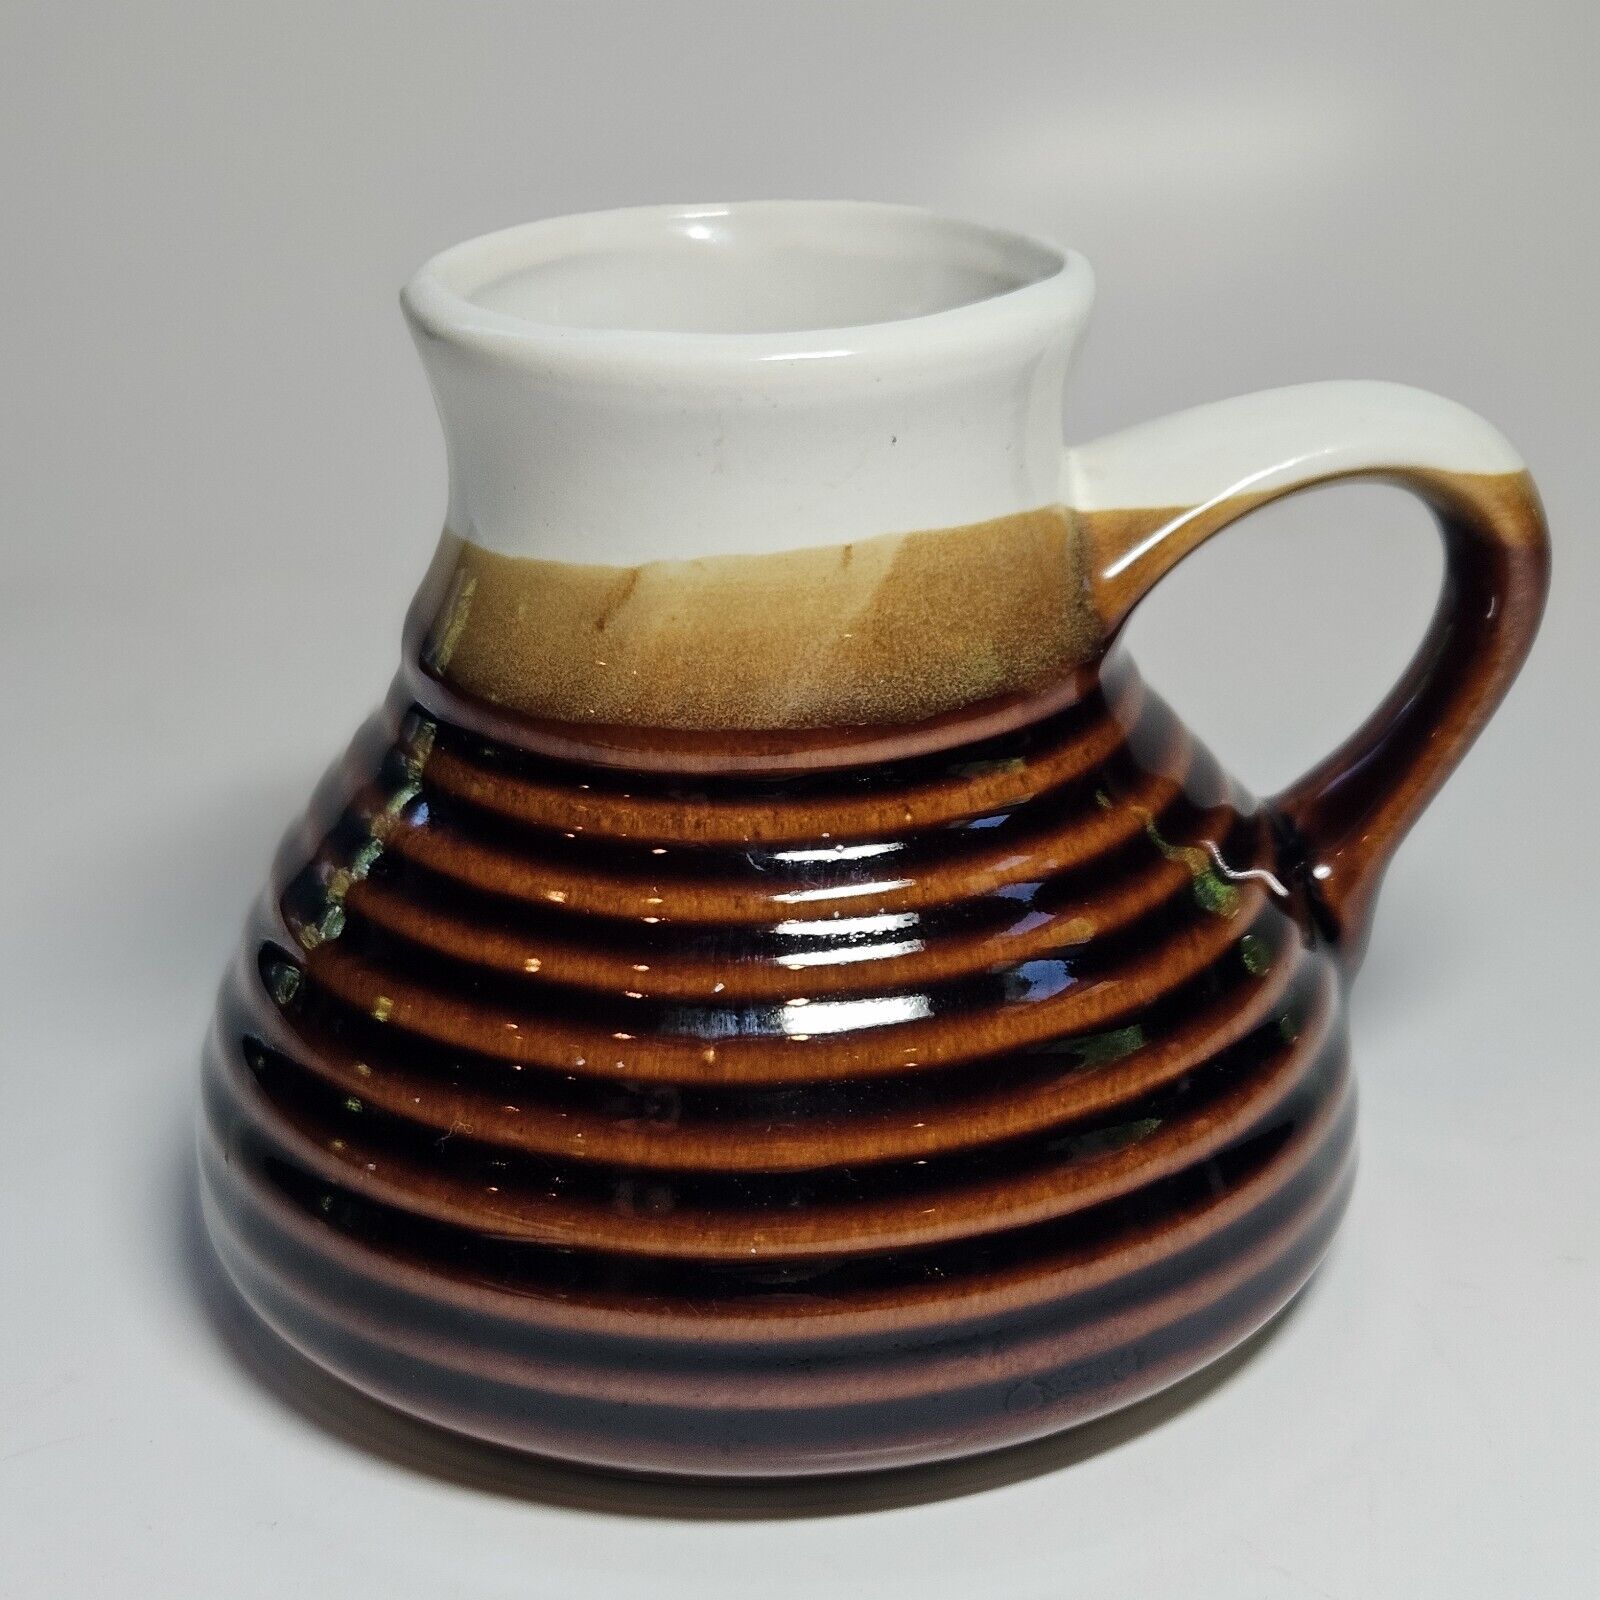 Vintage No-Spill Travel Coffee Cup/Mug Pottery. Brown and White